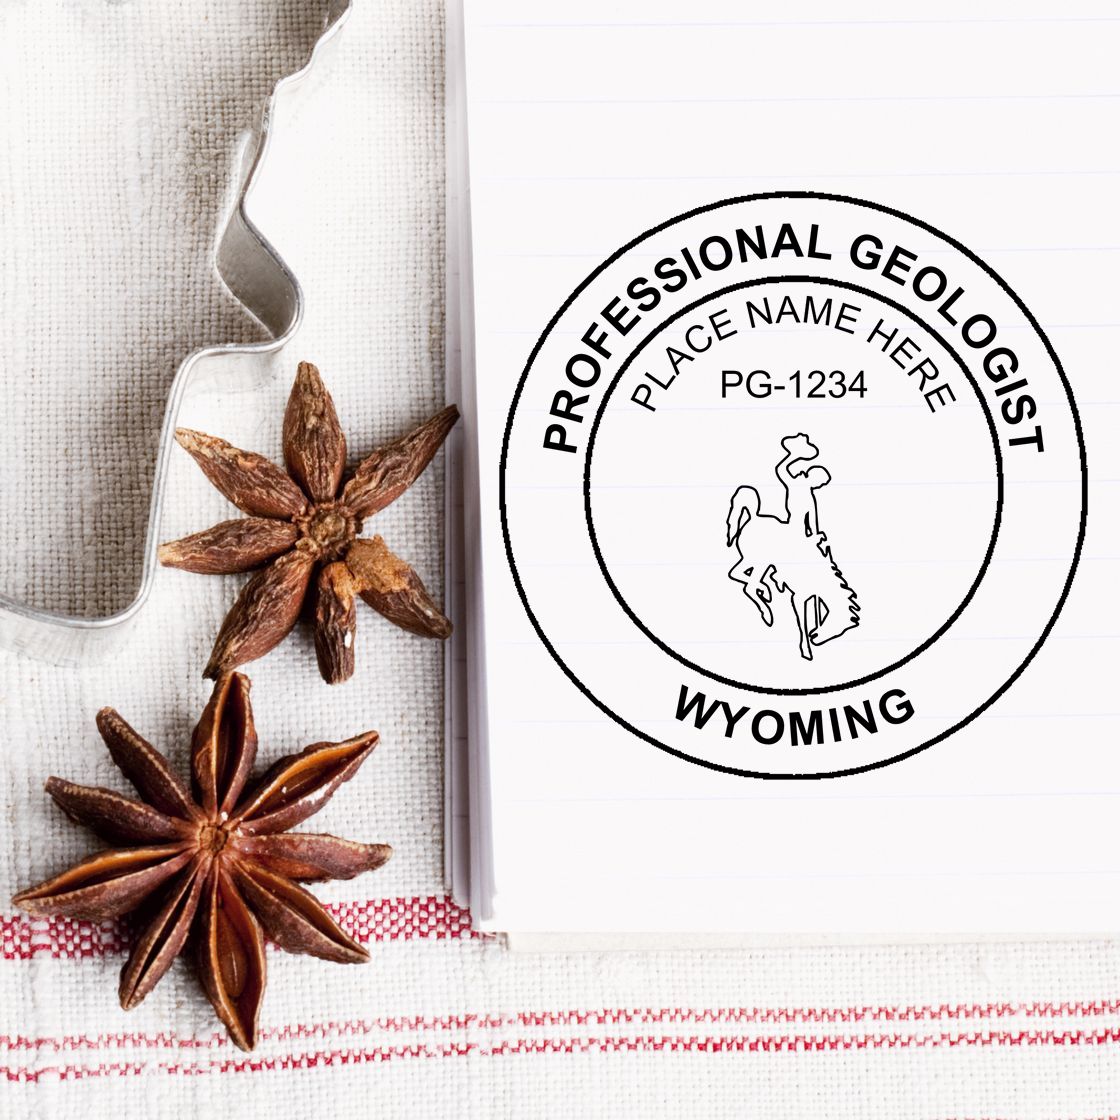 A lifestyle photo showing a stamped image of the Slim Pre-Inked Wyoming Professional Geologist Seal Stamp on a piece of paper